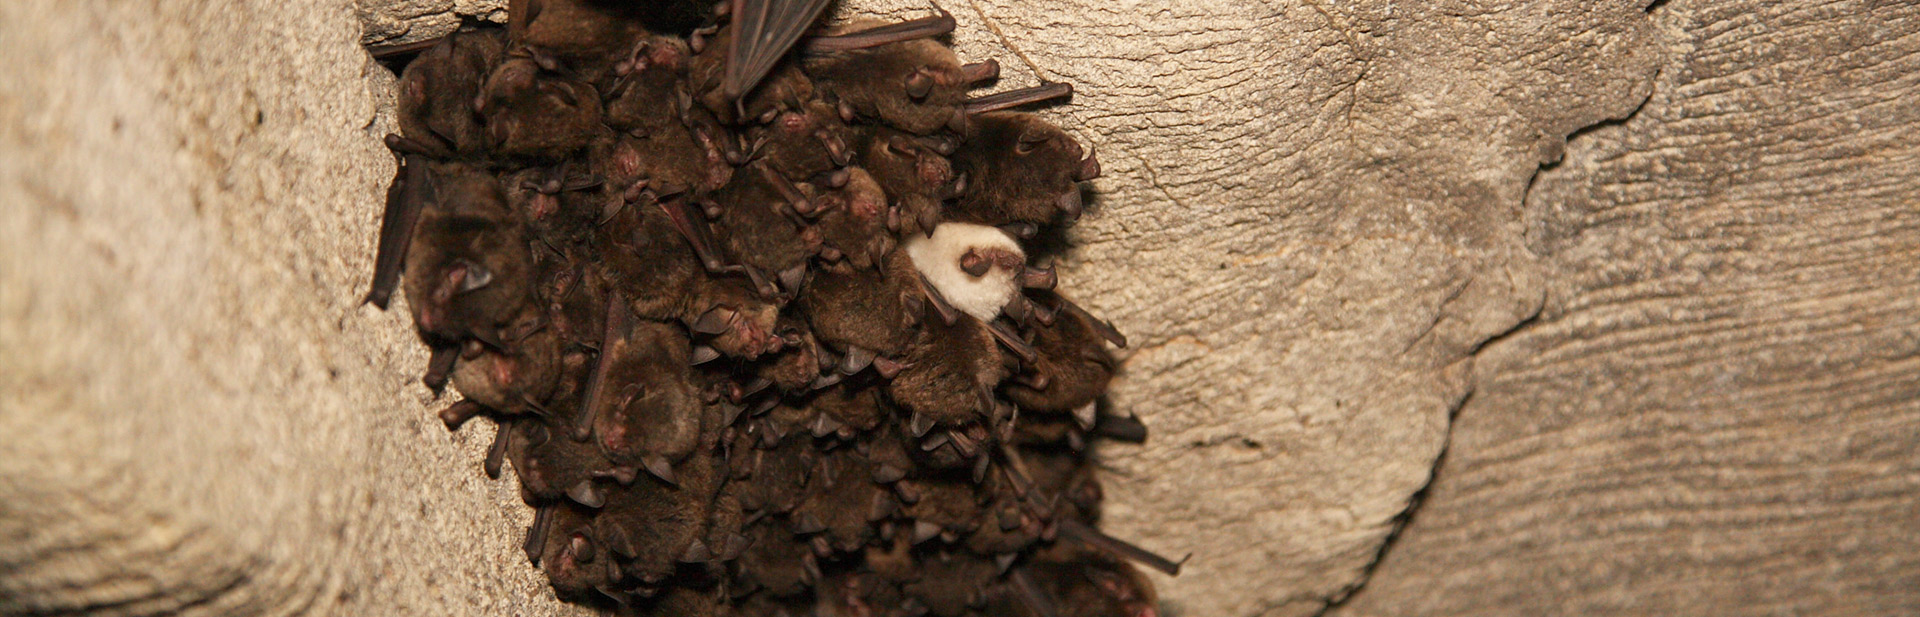 Bats on a cave ceiling